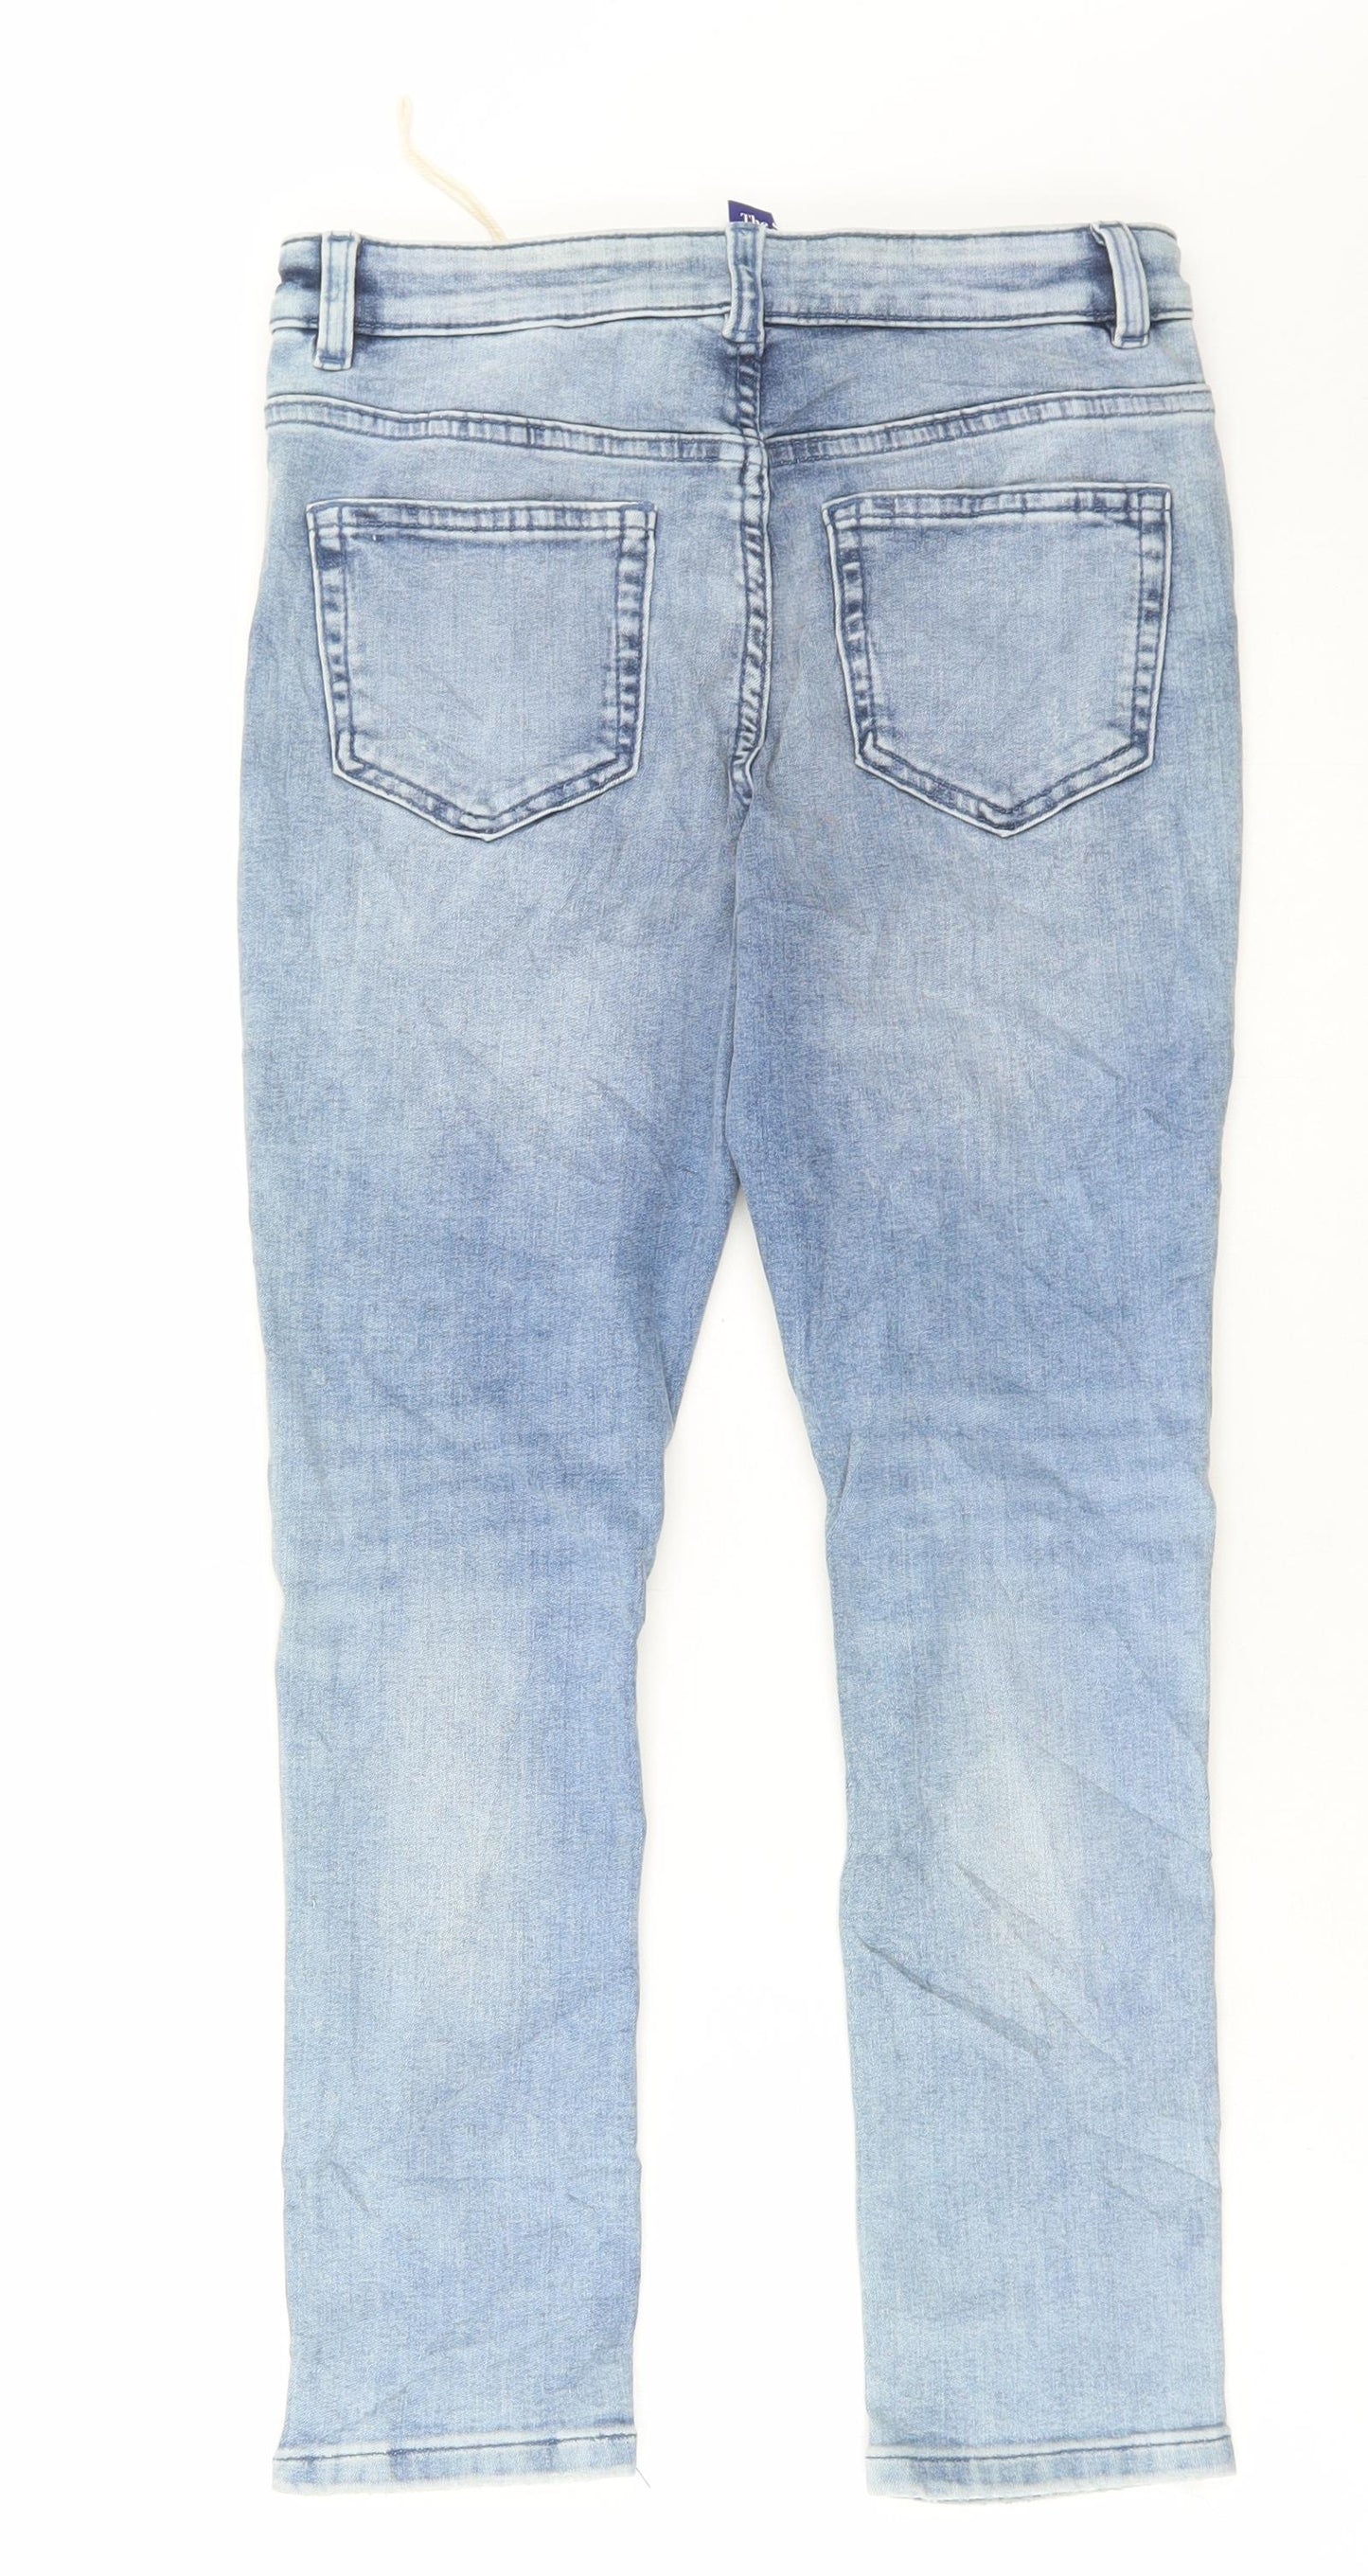 Marks and Spencer Girls Blue Cotton Skinny Jeans Size 9-10 Years Regular Button - Distressed Denim